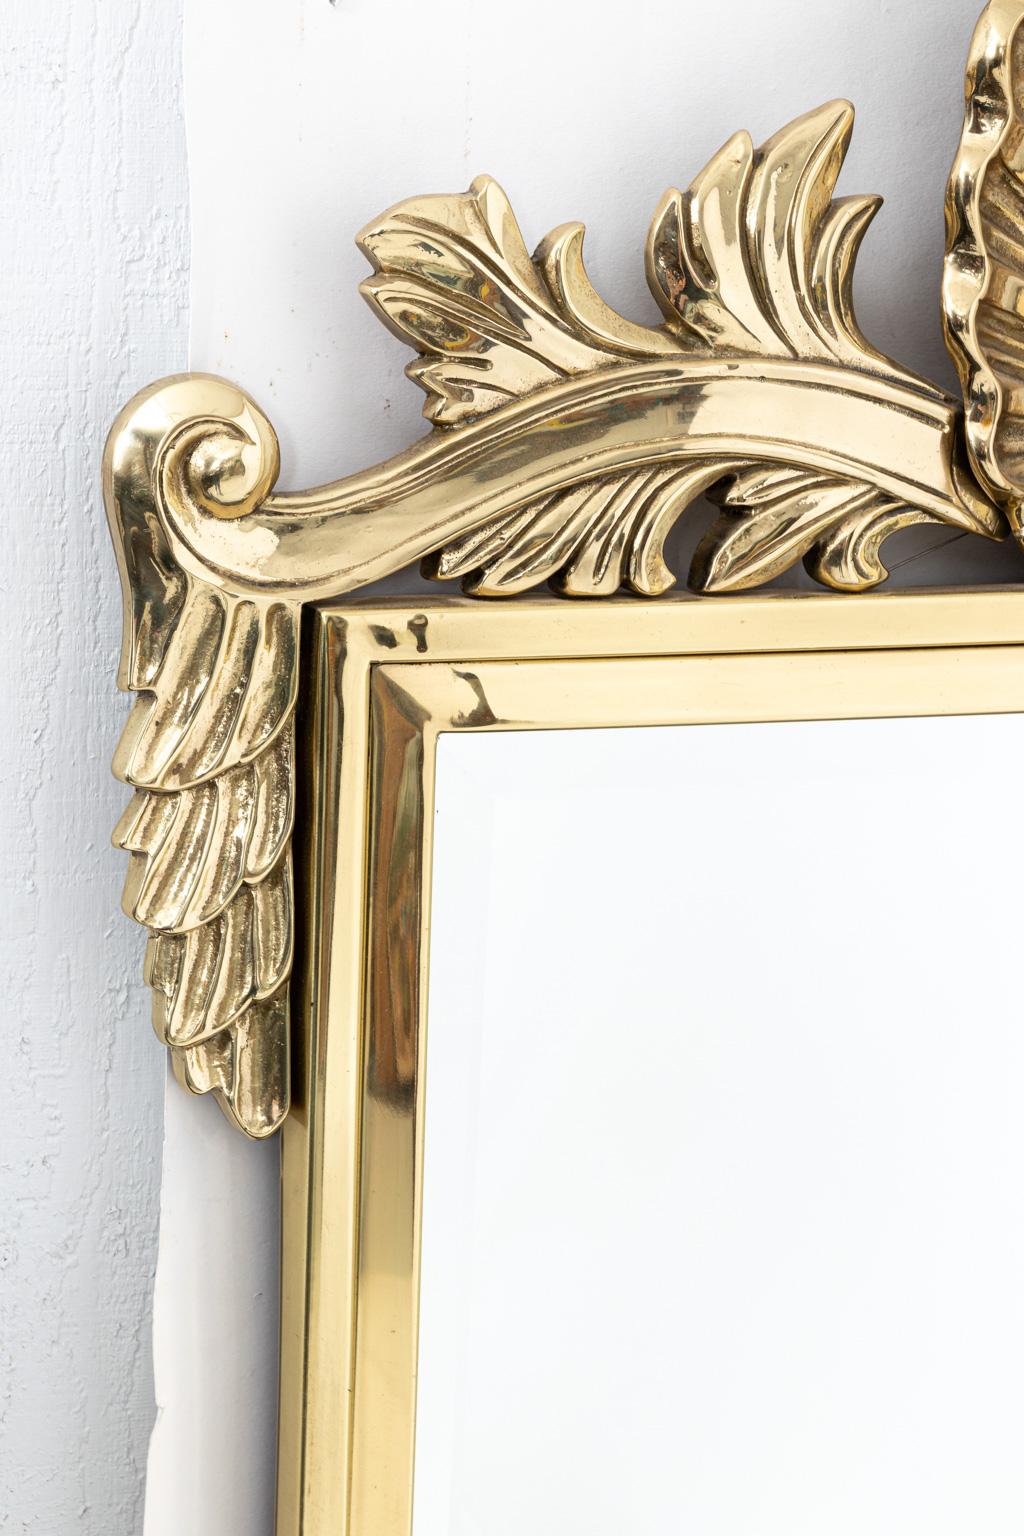 Large solid brass mirror with scallop shell crest featuring scroll and foliate decoration, circa 1970s. The stepped frame also features a beveled mirror. Please note of wear consistent with age. Made in the United States.